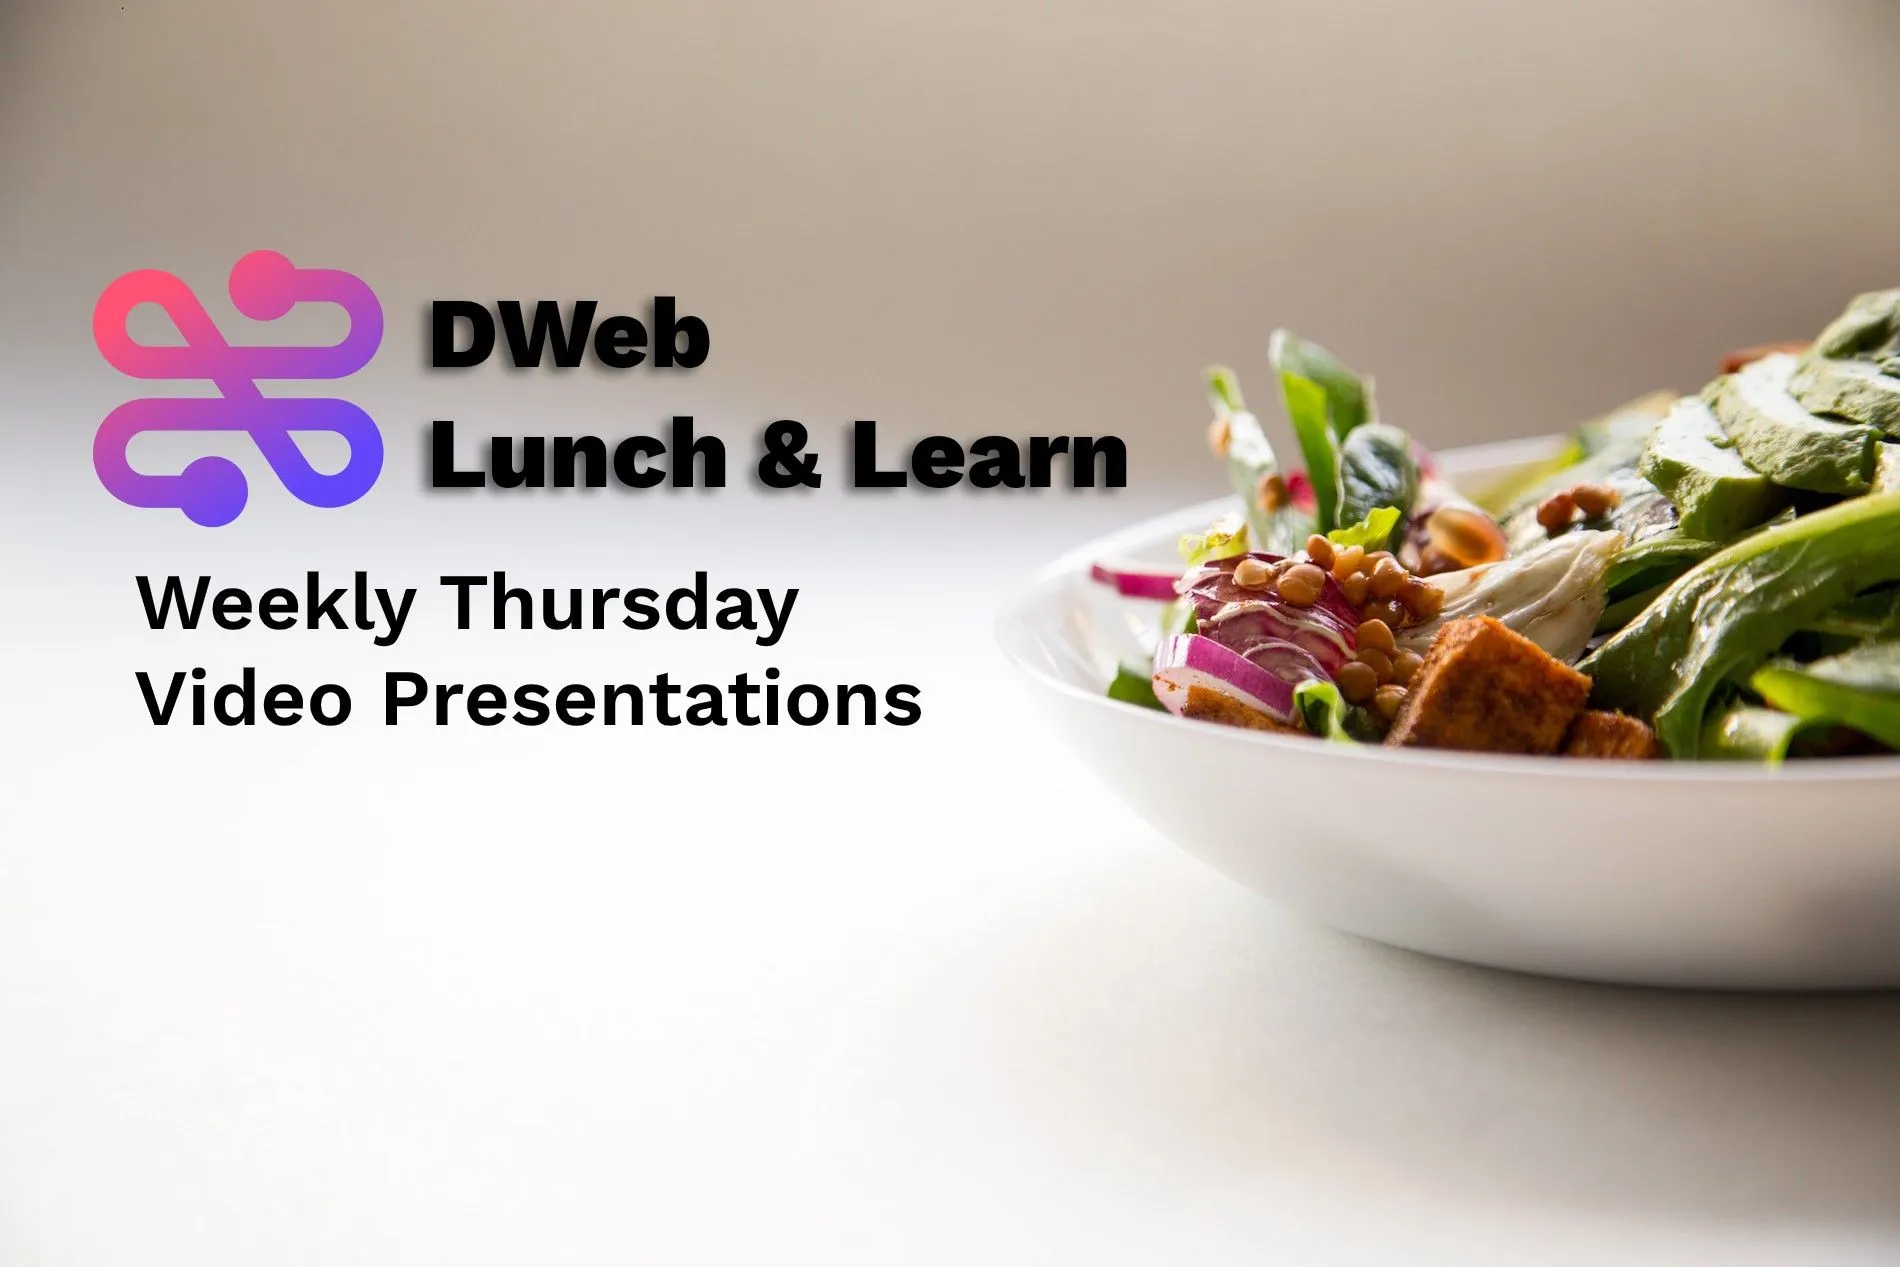 Weekly Decentralized Web "Lunch & Learn" Video Calls